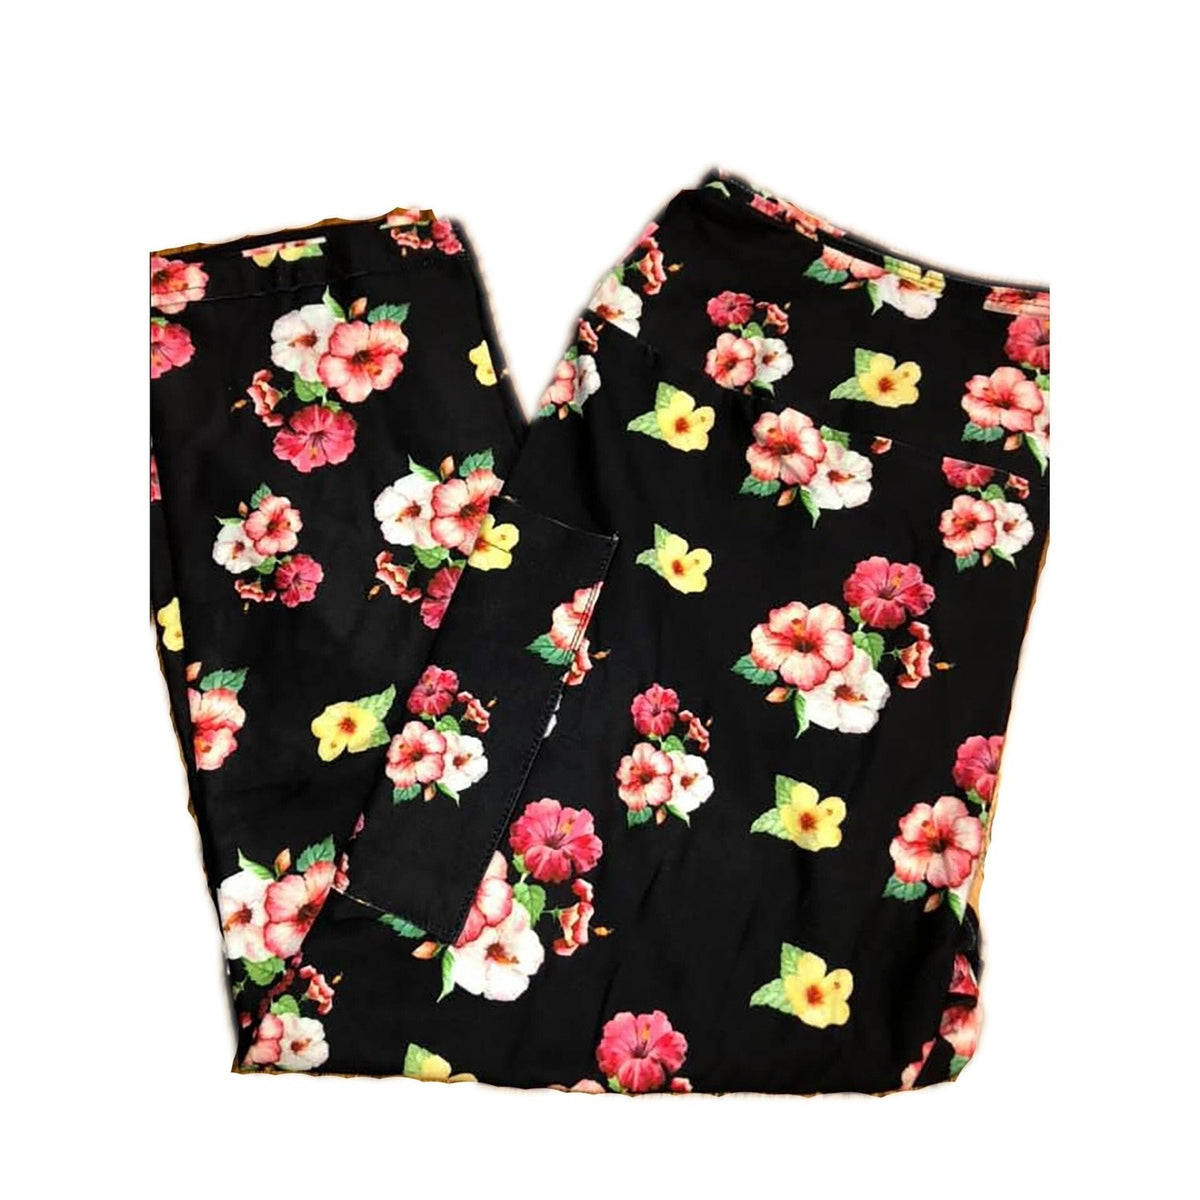 Rose Leggings Capri with Yellow, and Pink Roses on Black Background with Pockets